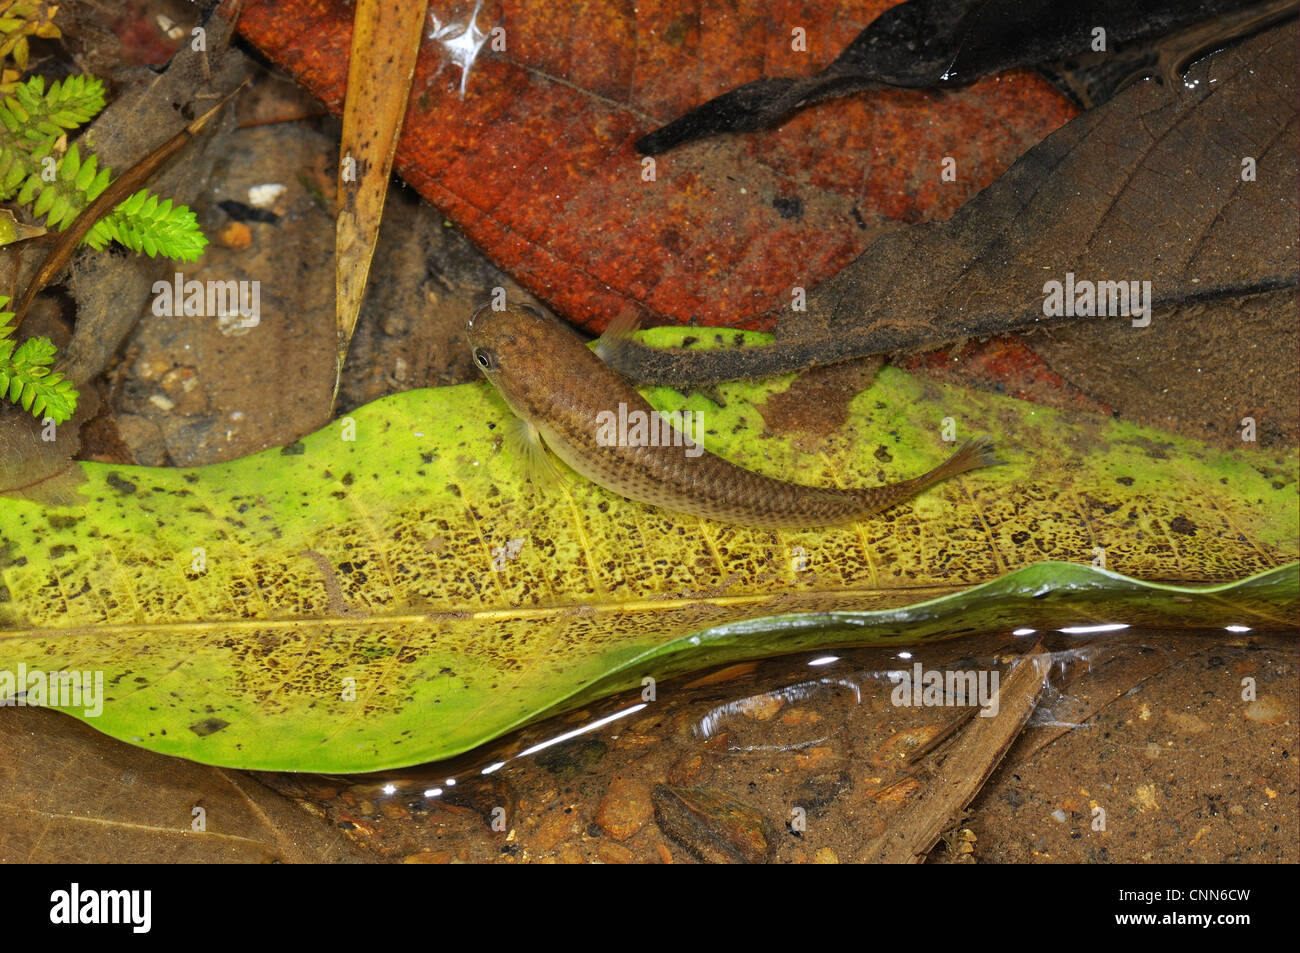 Hart's Rivulus (Rivulus hartii) adult, swimming amongst fallen leaves in shallow mountain stream, Trinidad, Trinidad and Tobago Stock Photo